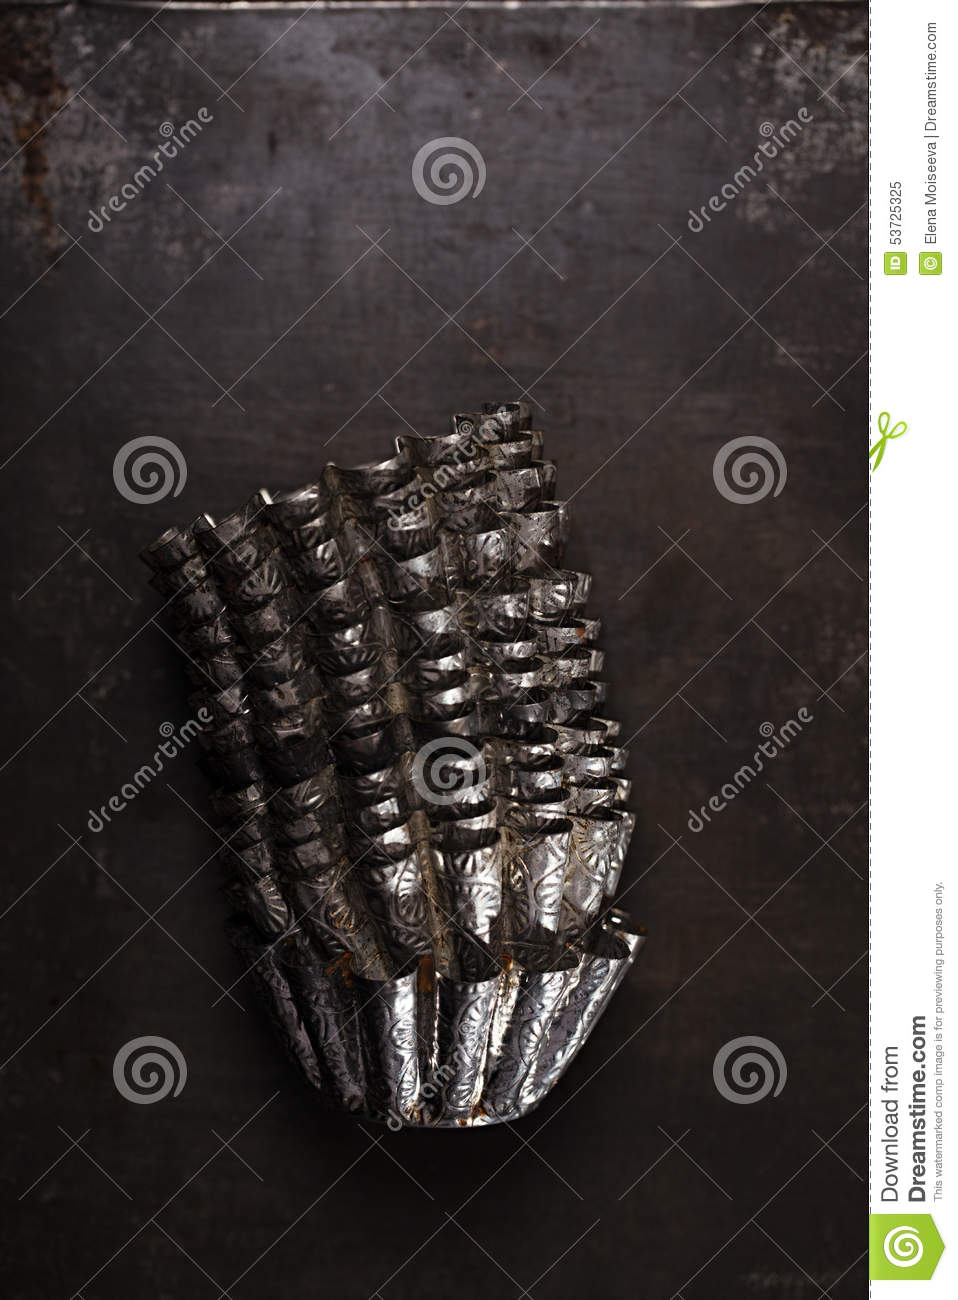 Abstract Picture With Vintage Baking Tins Or Molds Stacked On Dark